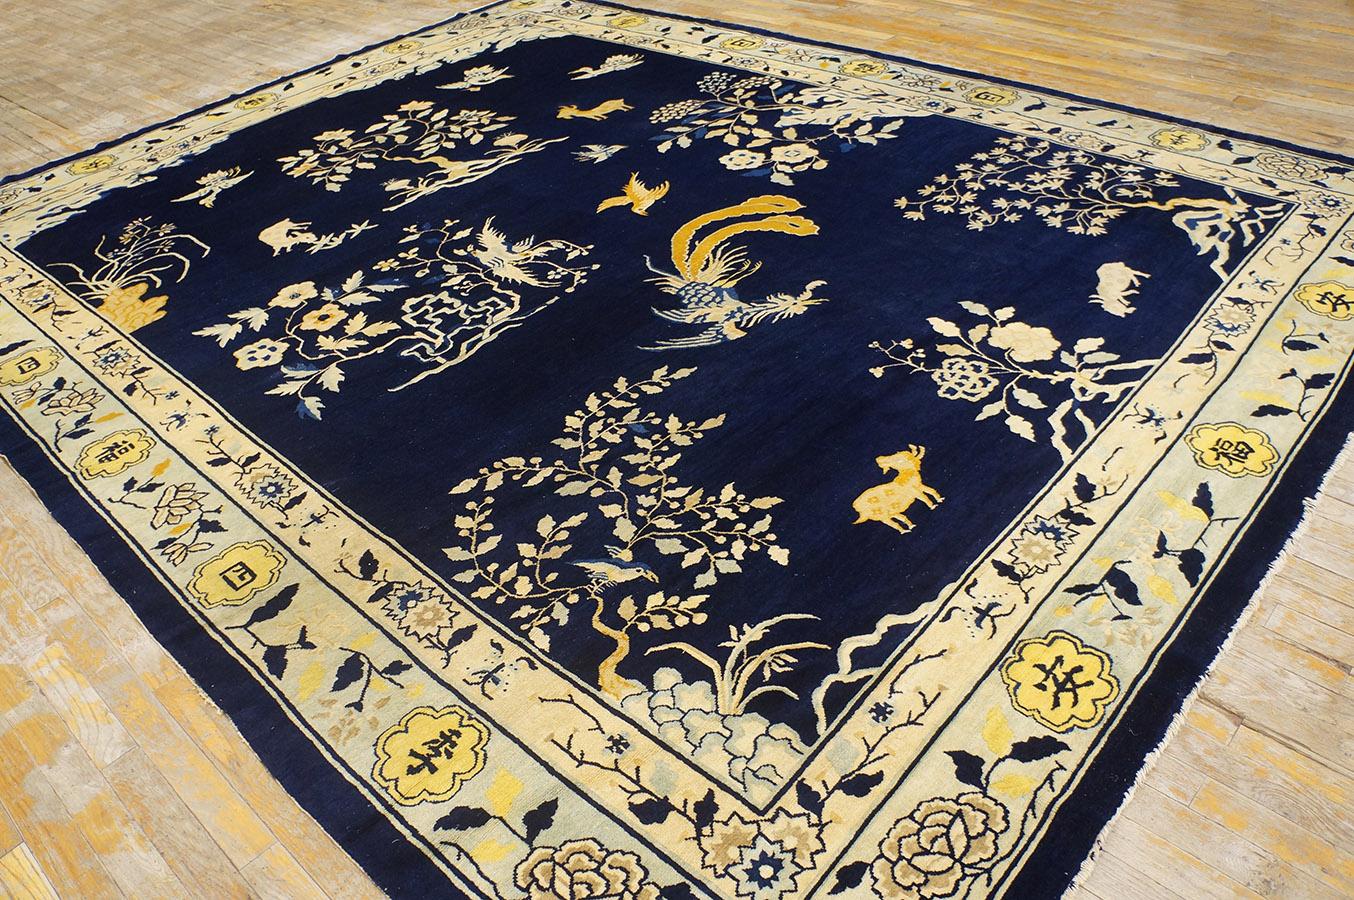 Hand-Knotted 19th Century Chinese Peking Carpet ( 9'2'' x 11'8' - 280 x 355 ) For Sale